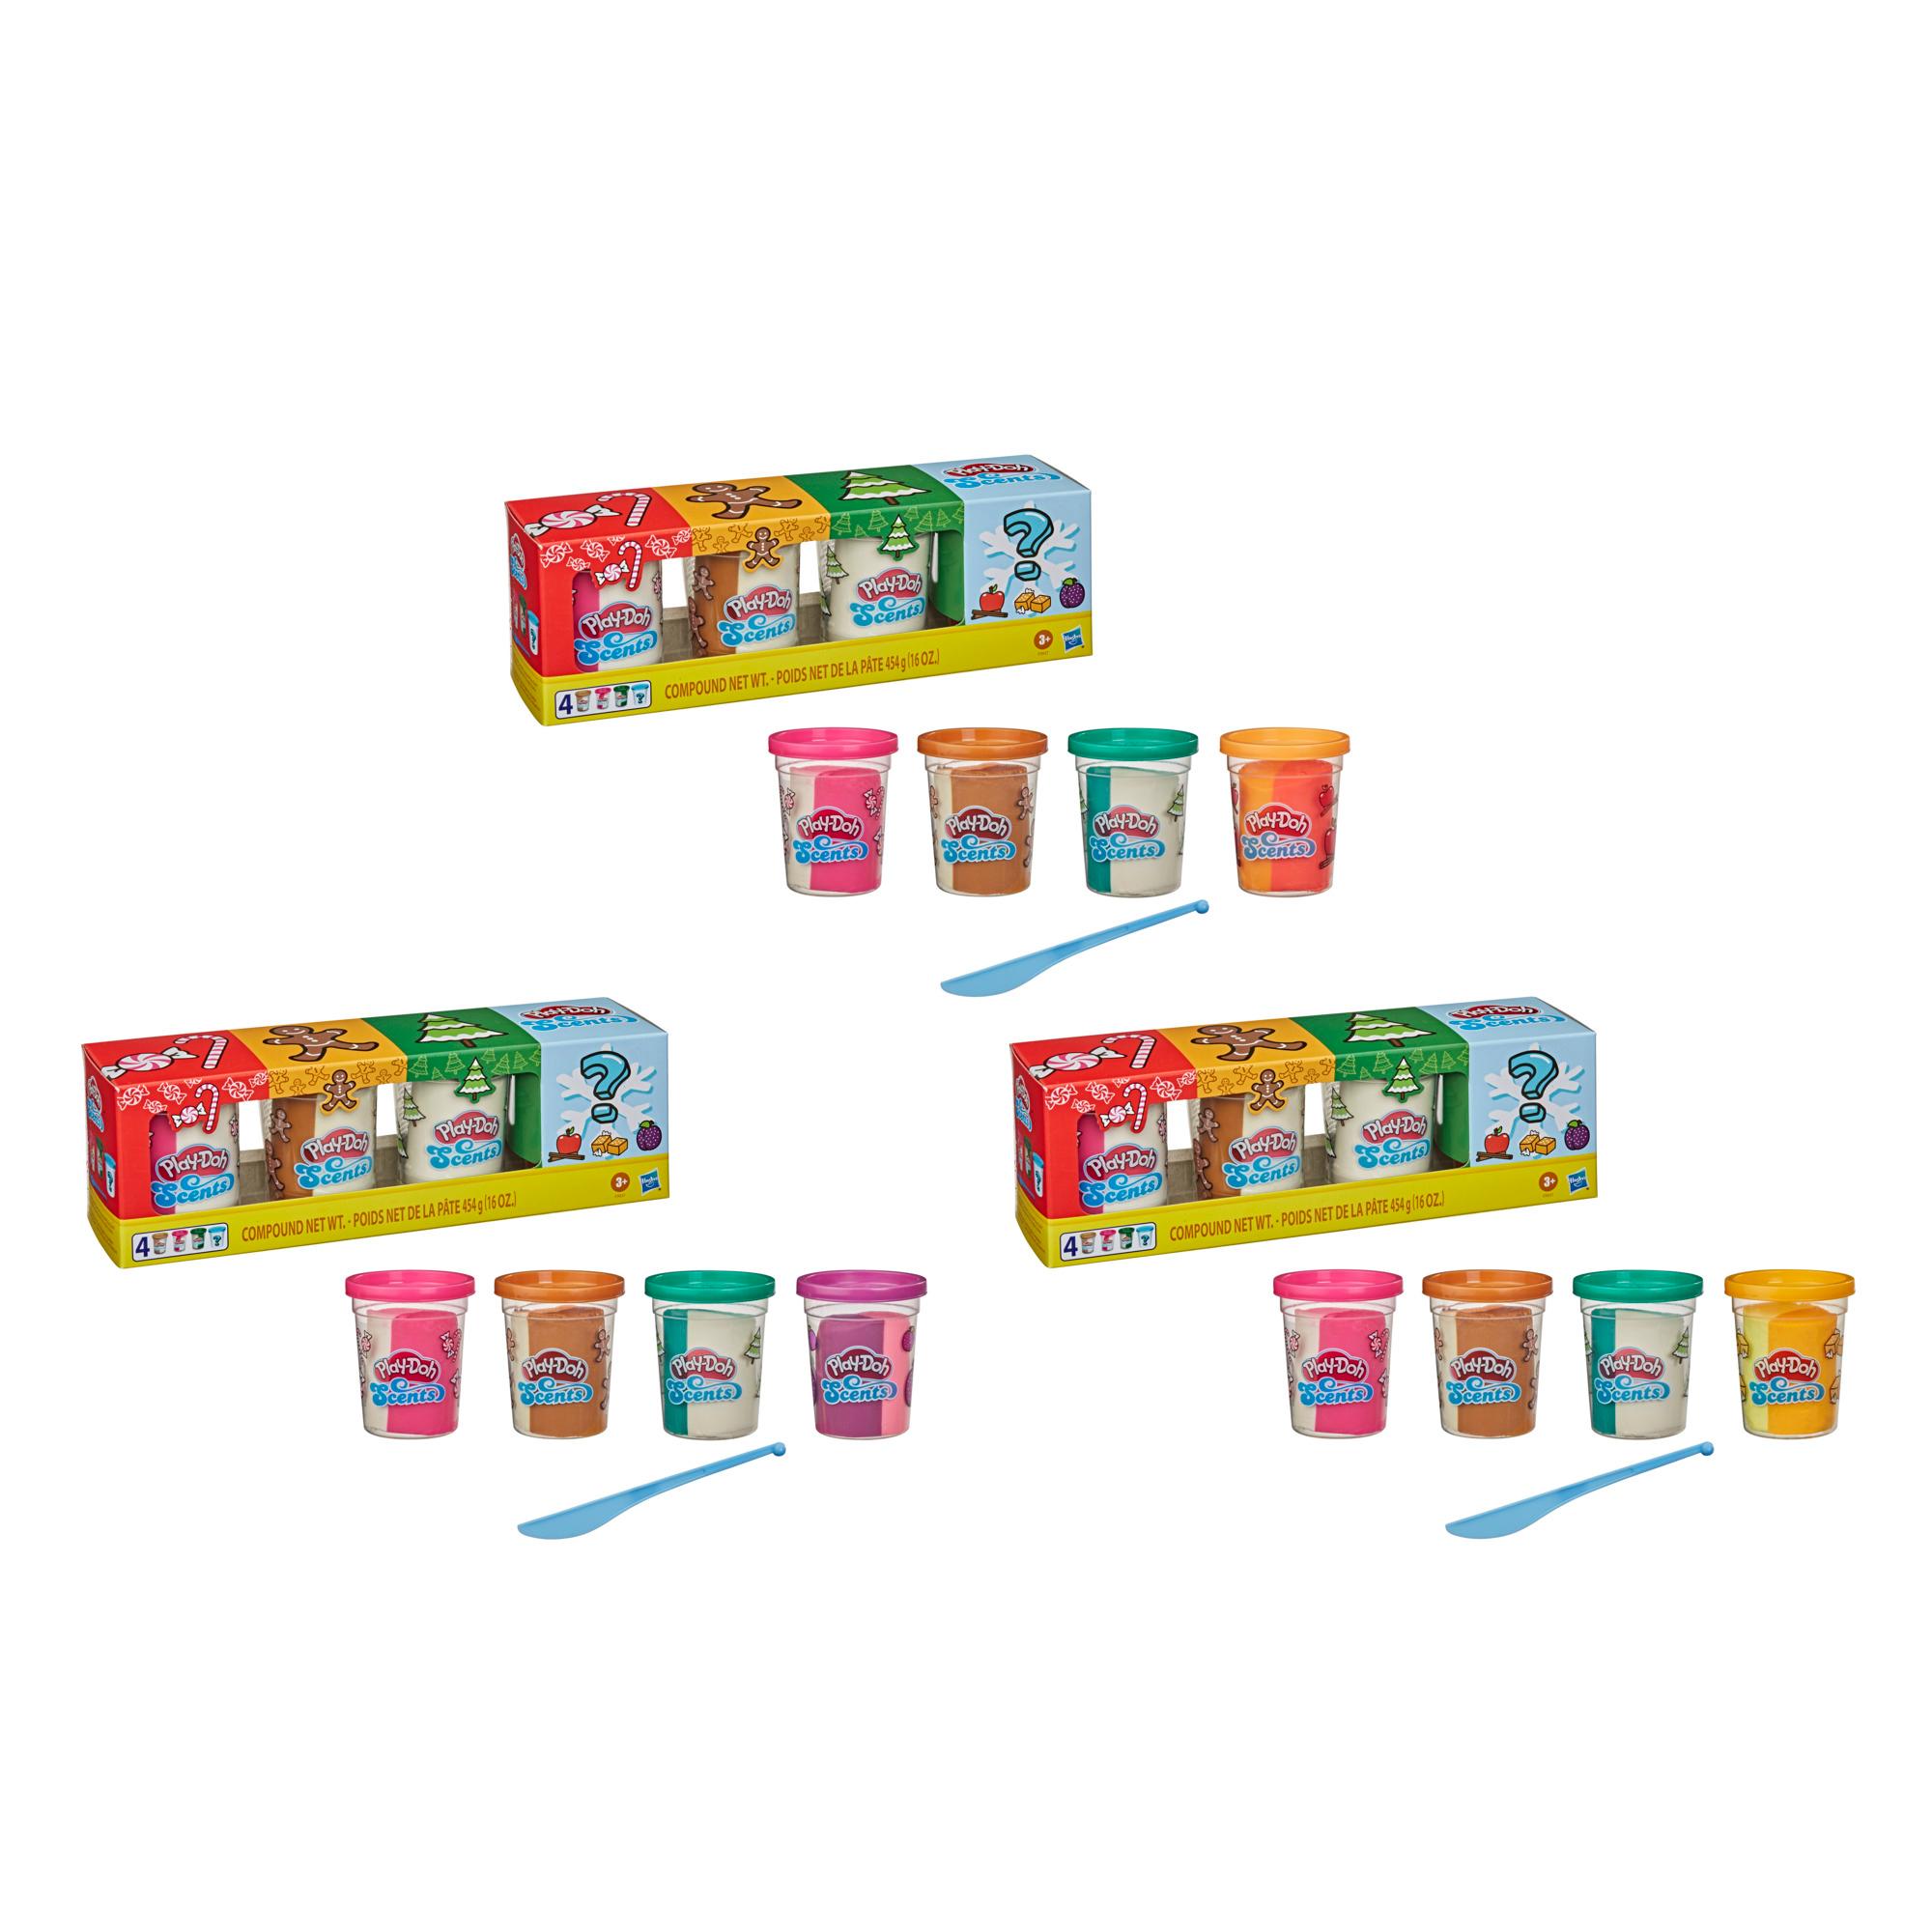 Play-Doh Scents Holiday Mystery 4-Pack with 4 Non-Toxic Scented Play-Doh Colors Including Surprise Scent